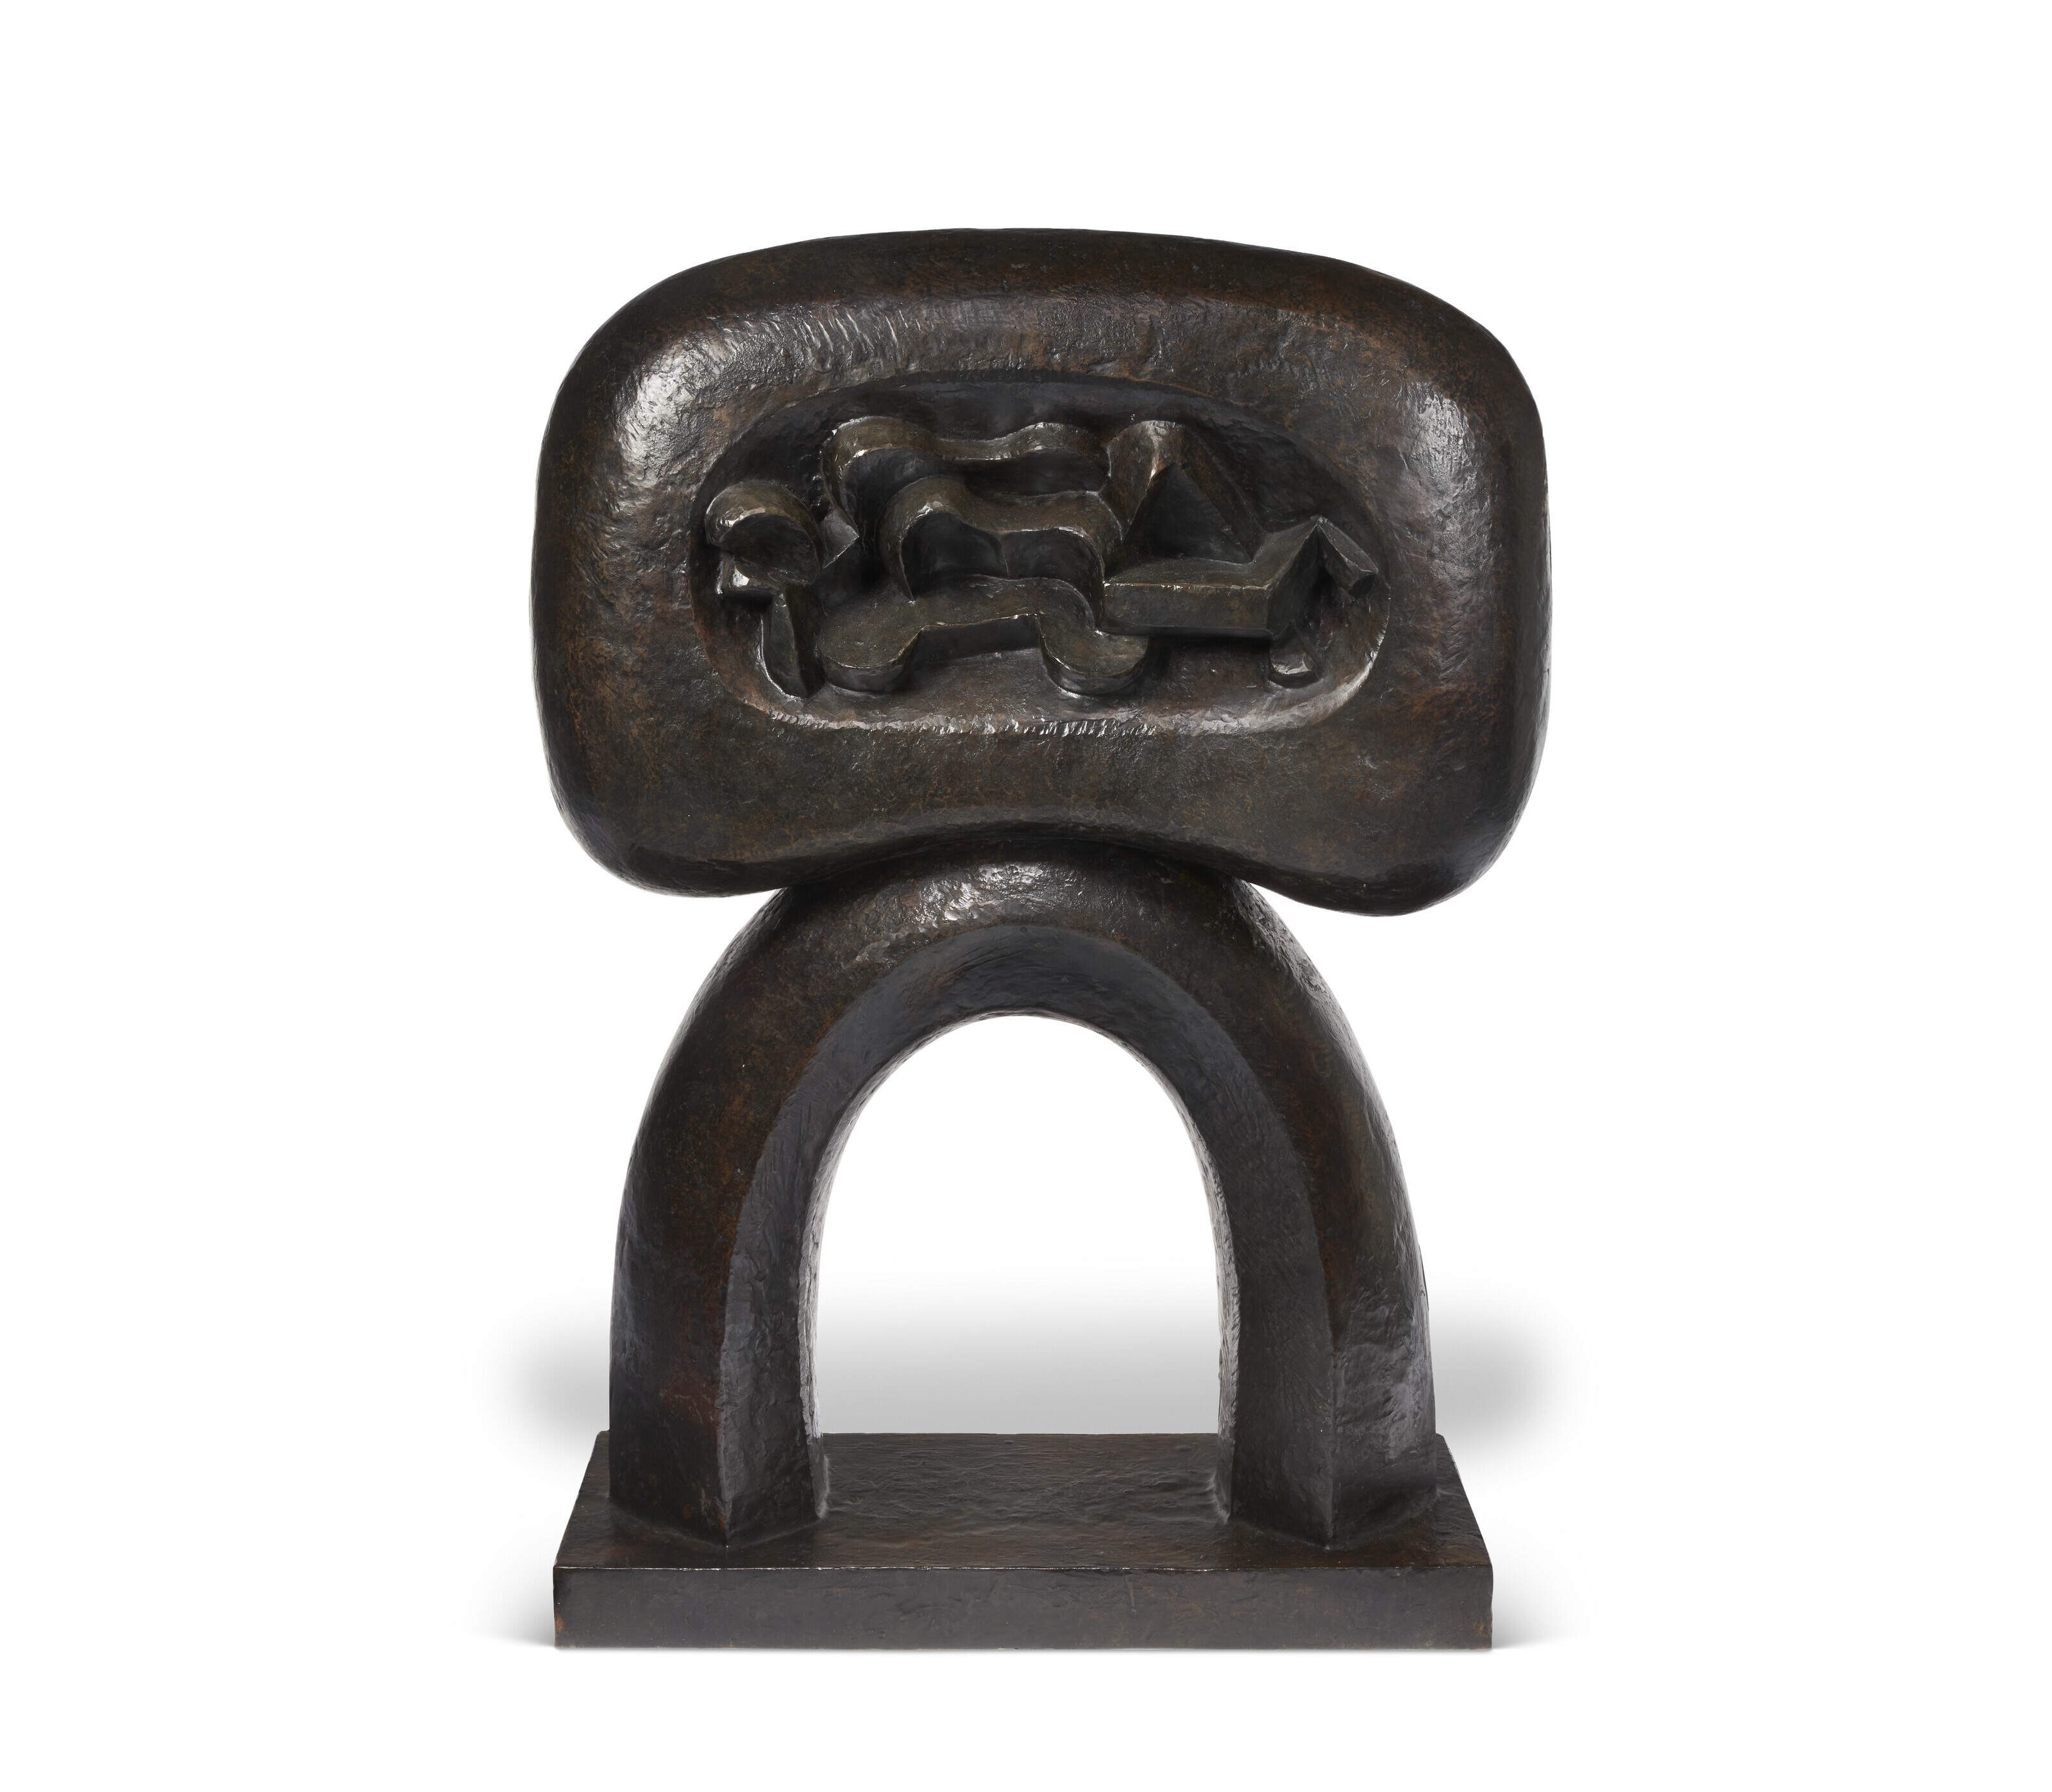 Ploumanach by Jacques Lipchitz, Conceived in 1926